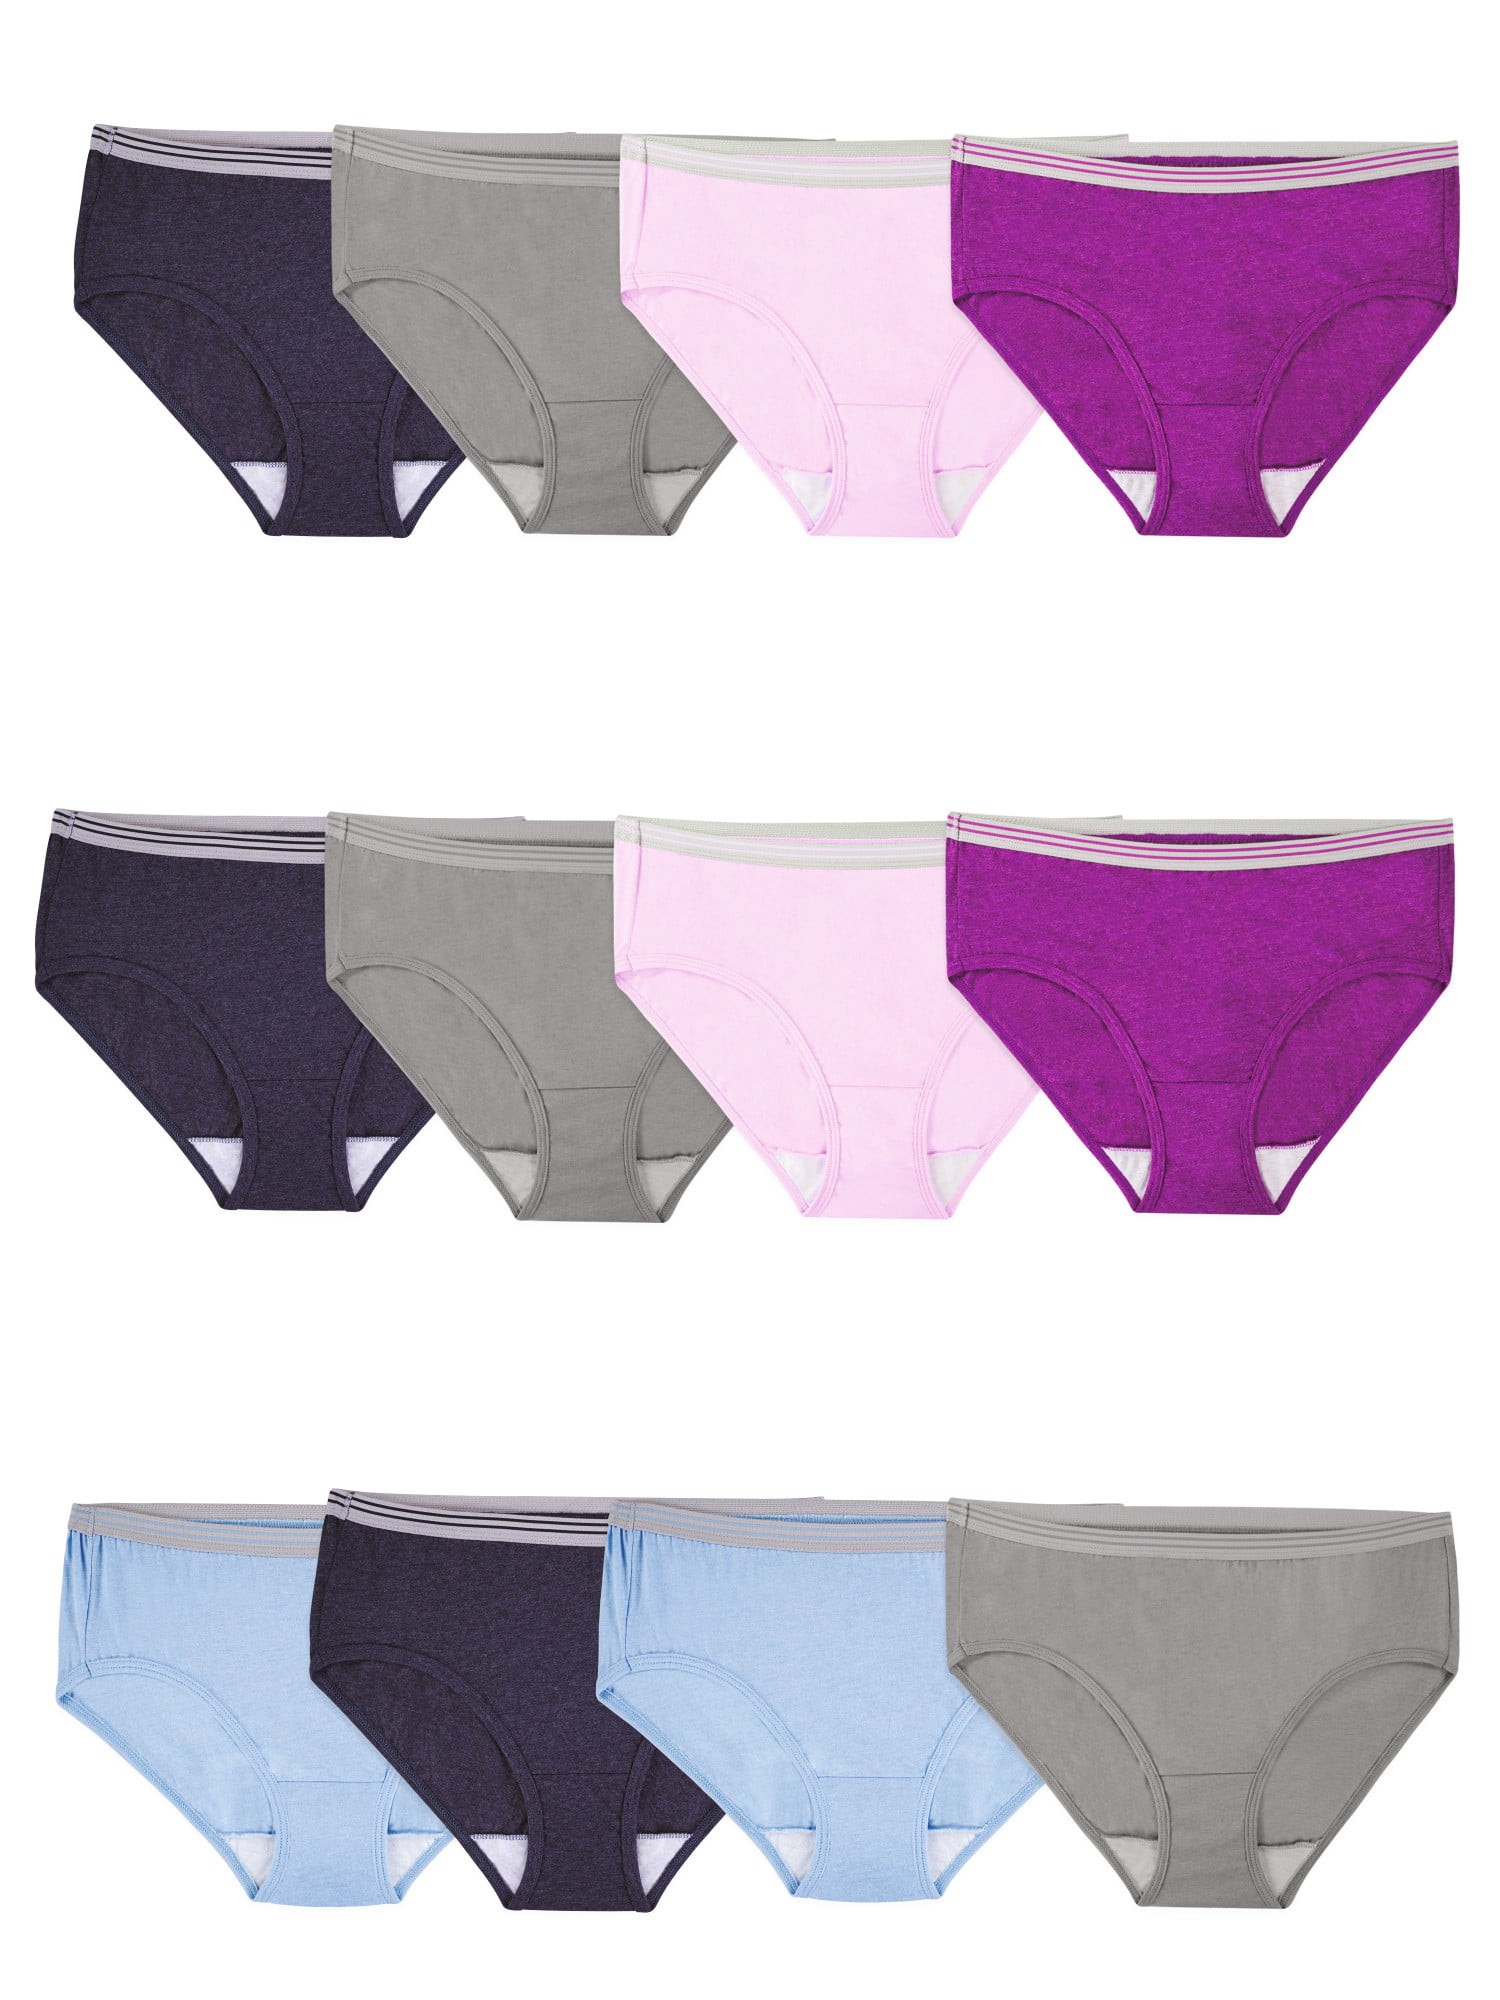 Fruit of the Loom Women's Low-Rise Brief Underwear, 6 Pack, Sizes